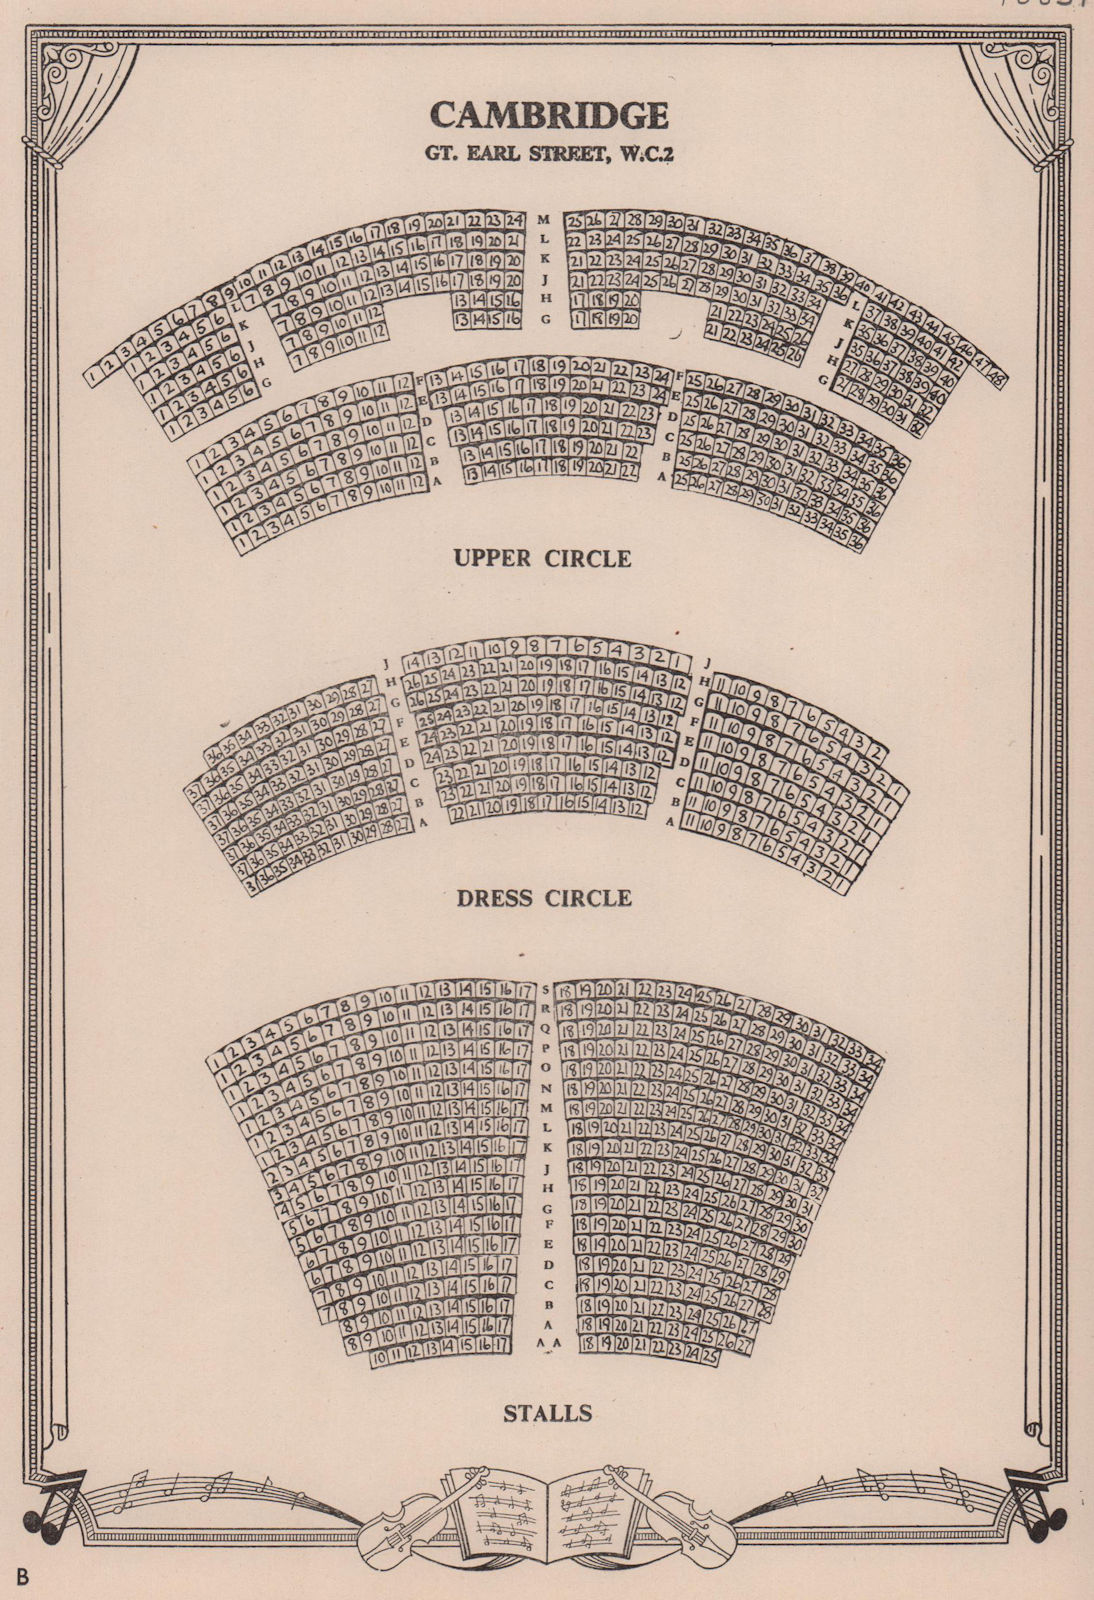 Associate Product Cambridge Theatre, Covent Garden, London. Vintage seating plan 1955 old print